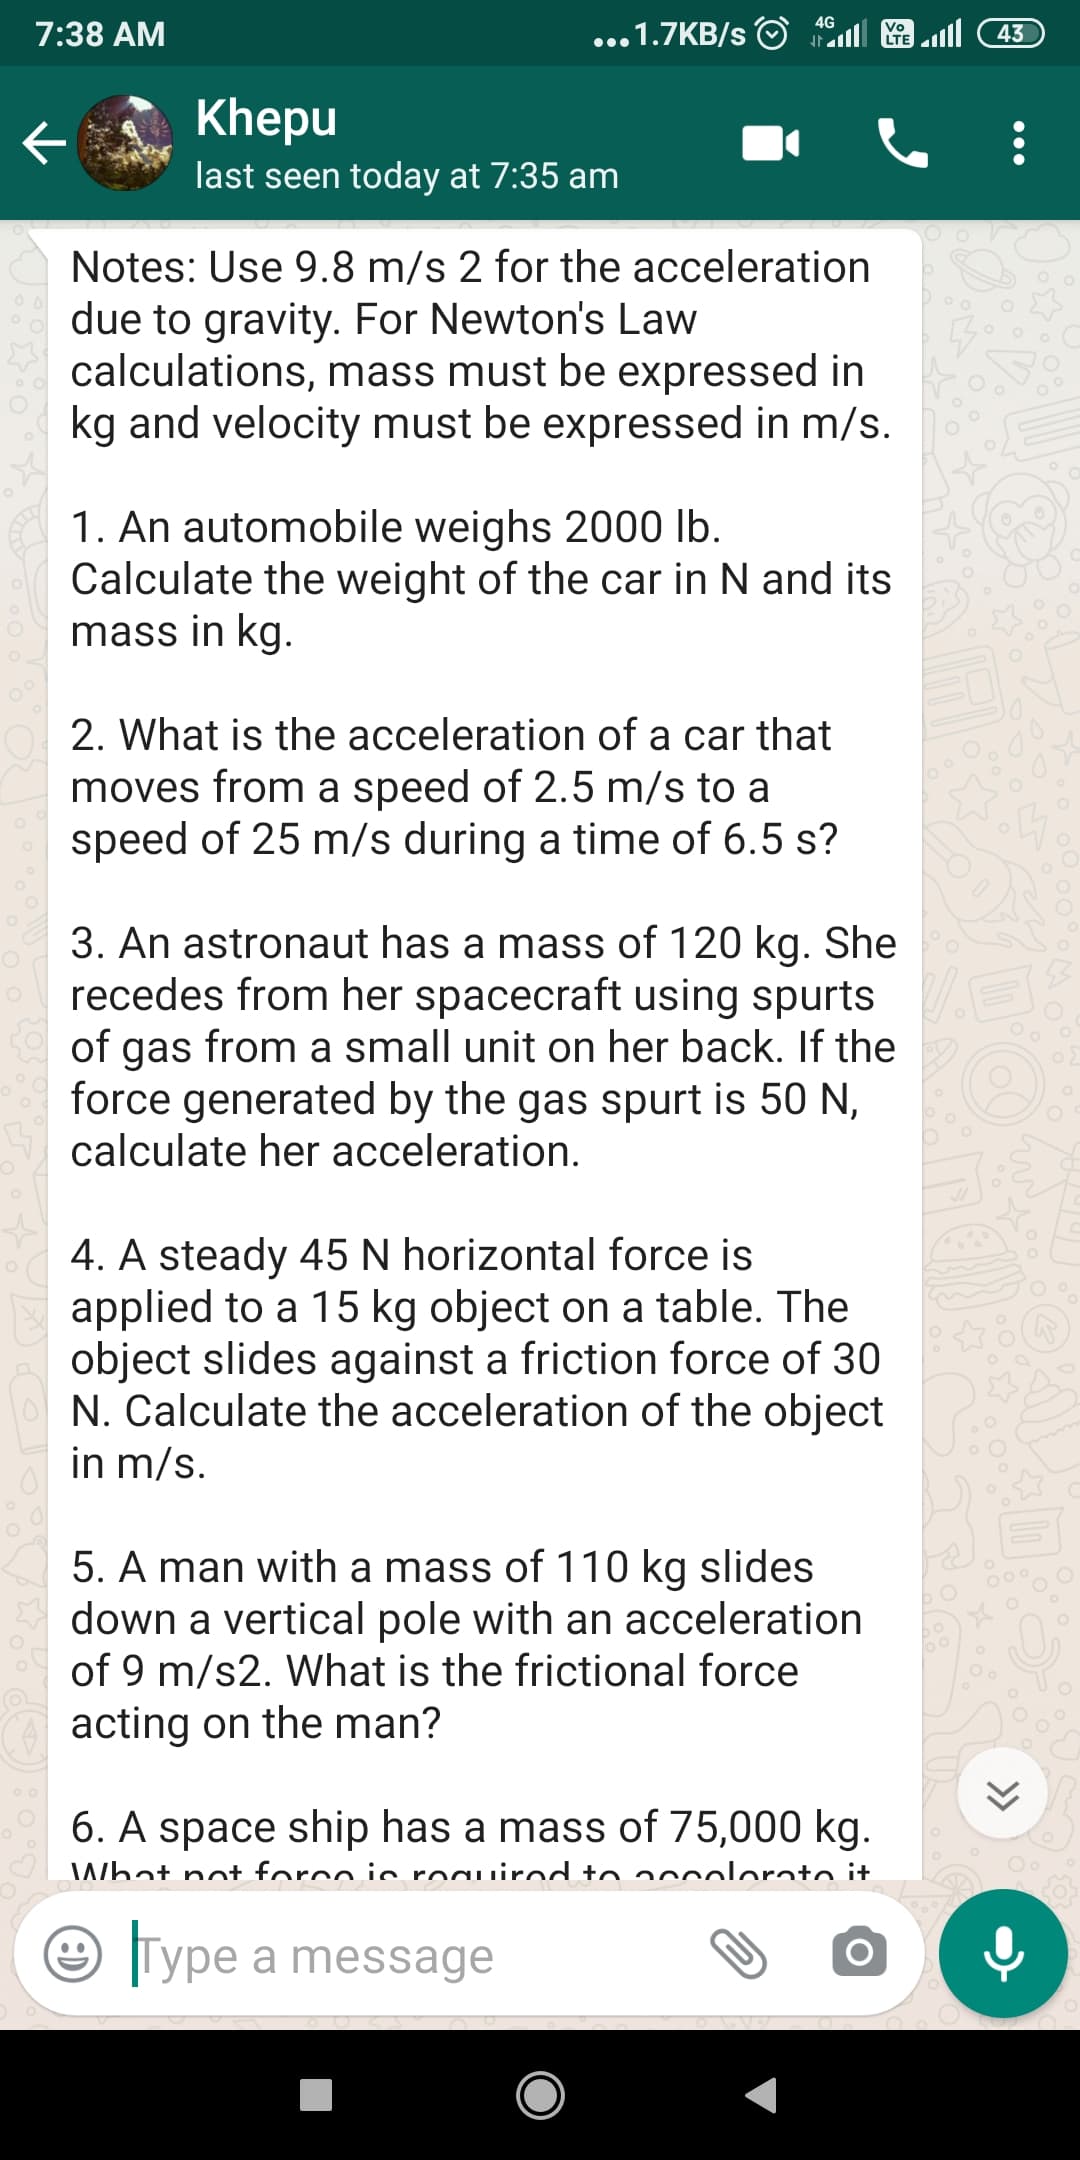 1. An automobile weighs 2000 lb.
Calculate the weight of the car in N and its
mass in kg.
2. What is the acceleration of a car that
moves from a speed of 2.5 m/s to a
speed of 25 m/s during a time of 6.5 s?
3. An astronaut has a mass of 120 kg. She
recedes from her spacecraft using spurts
of gas from a small unit on her back. If the
force generated by the gas spurt is 50 N,
calculate her acceleration.
4. A steady 45 N horizontal force is
applied to a 15 kg object on a table. The
object slides against a friction force of 30
N Colouloto + he 200eloretien of the obioot
